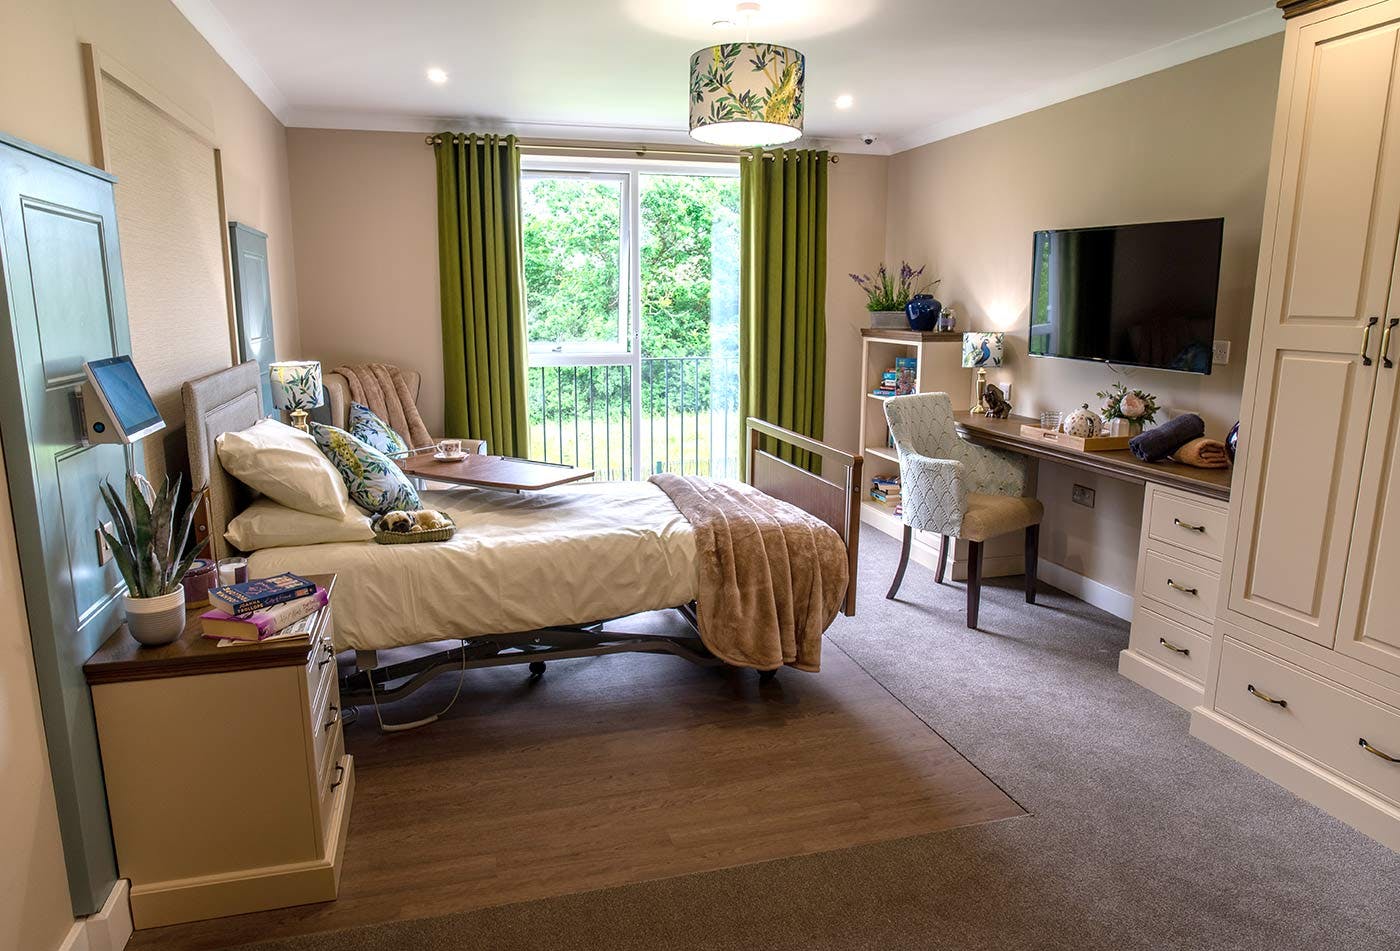 Blythe Rose Care Home in Solihull 19